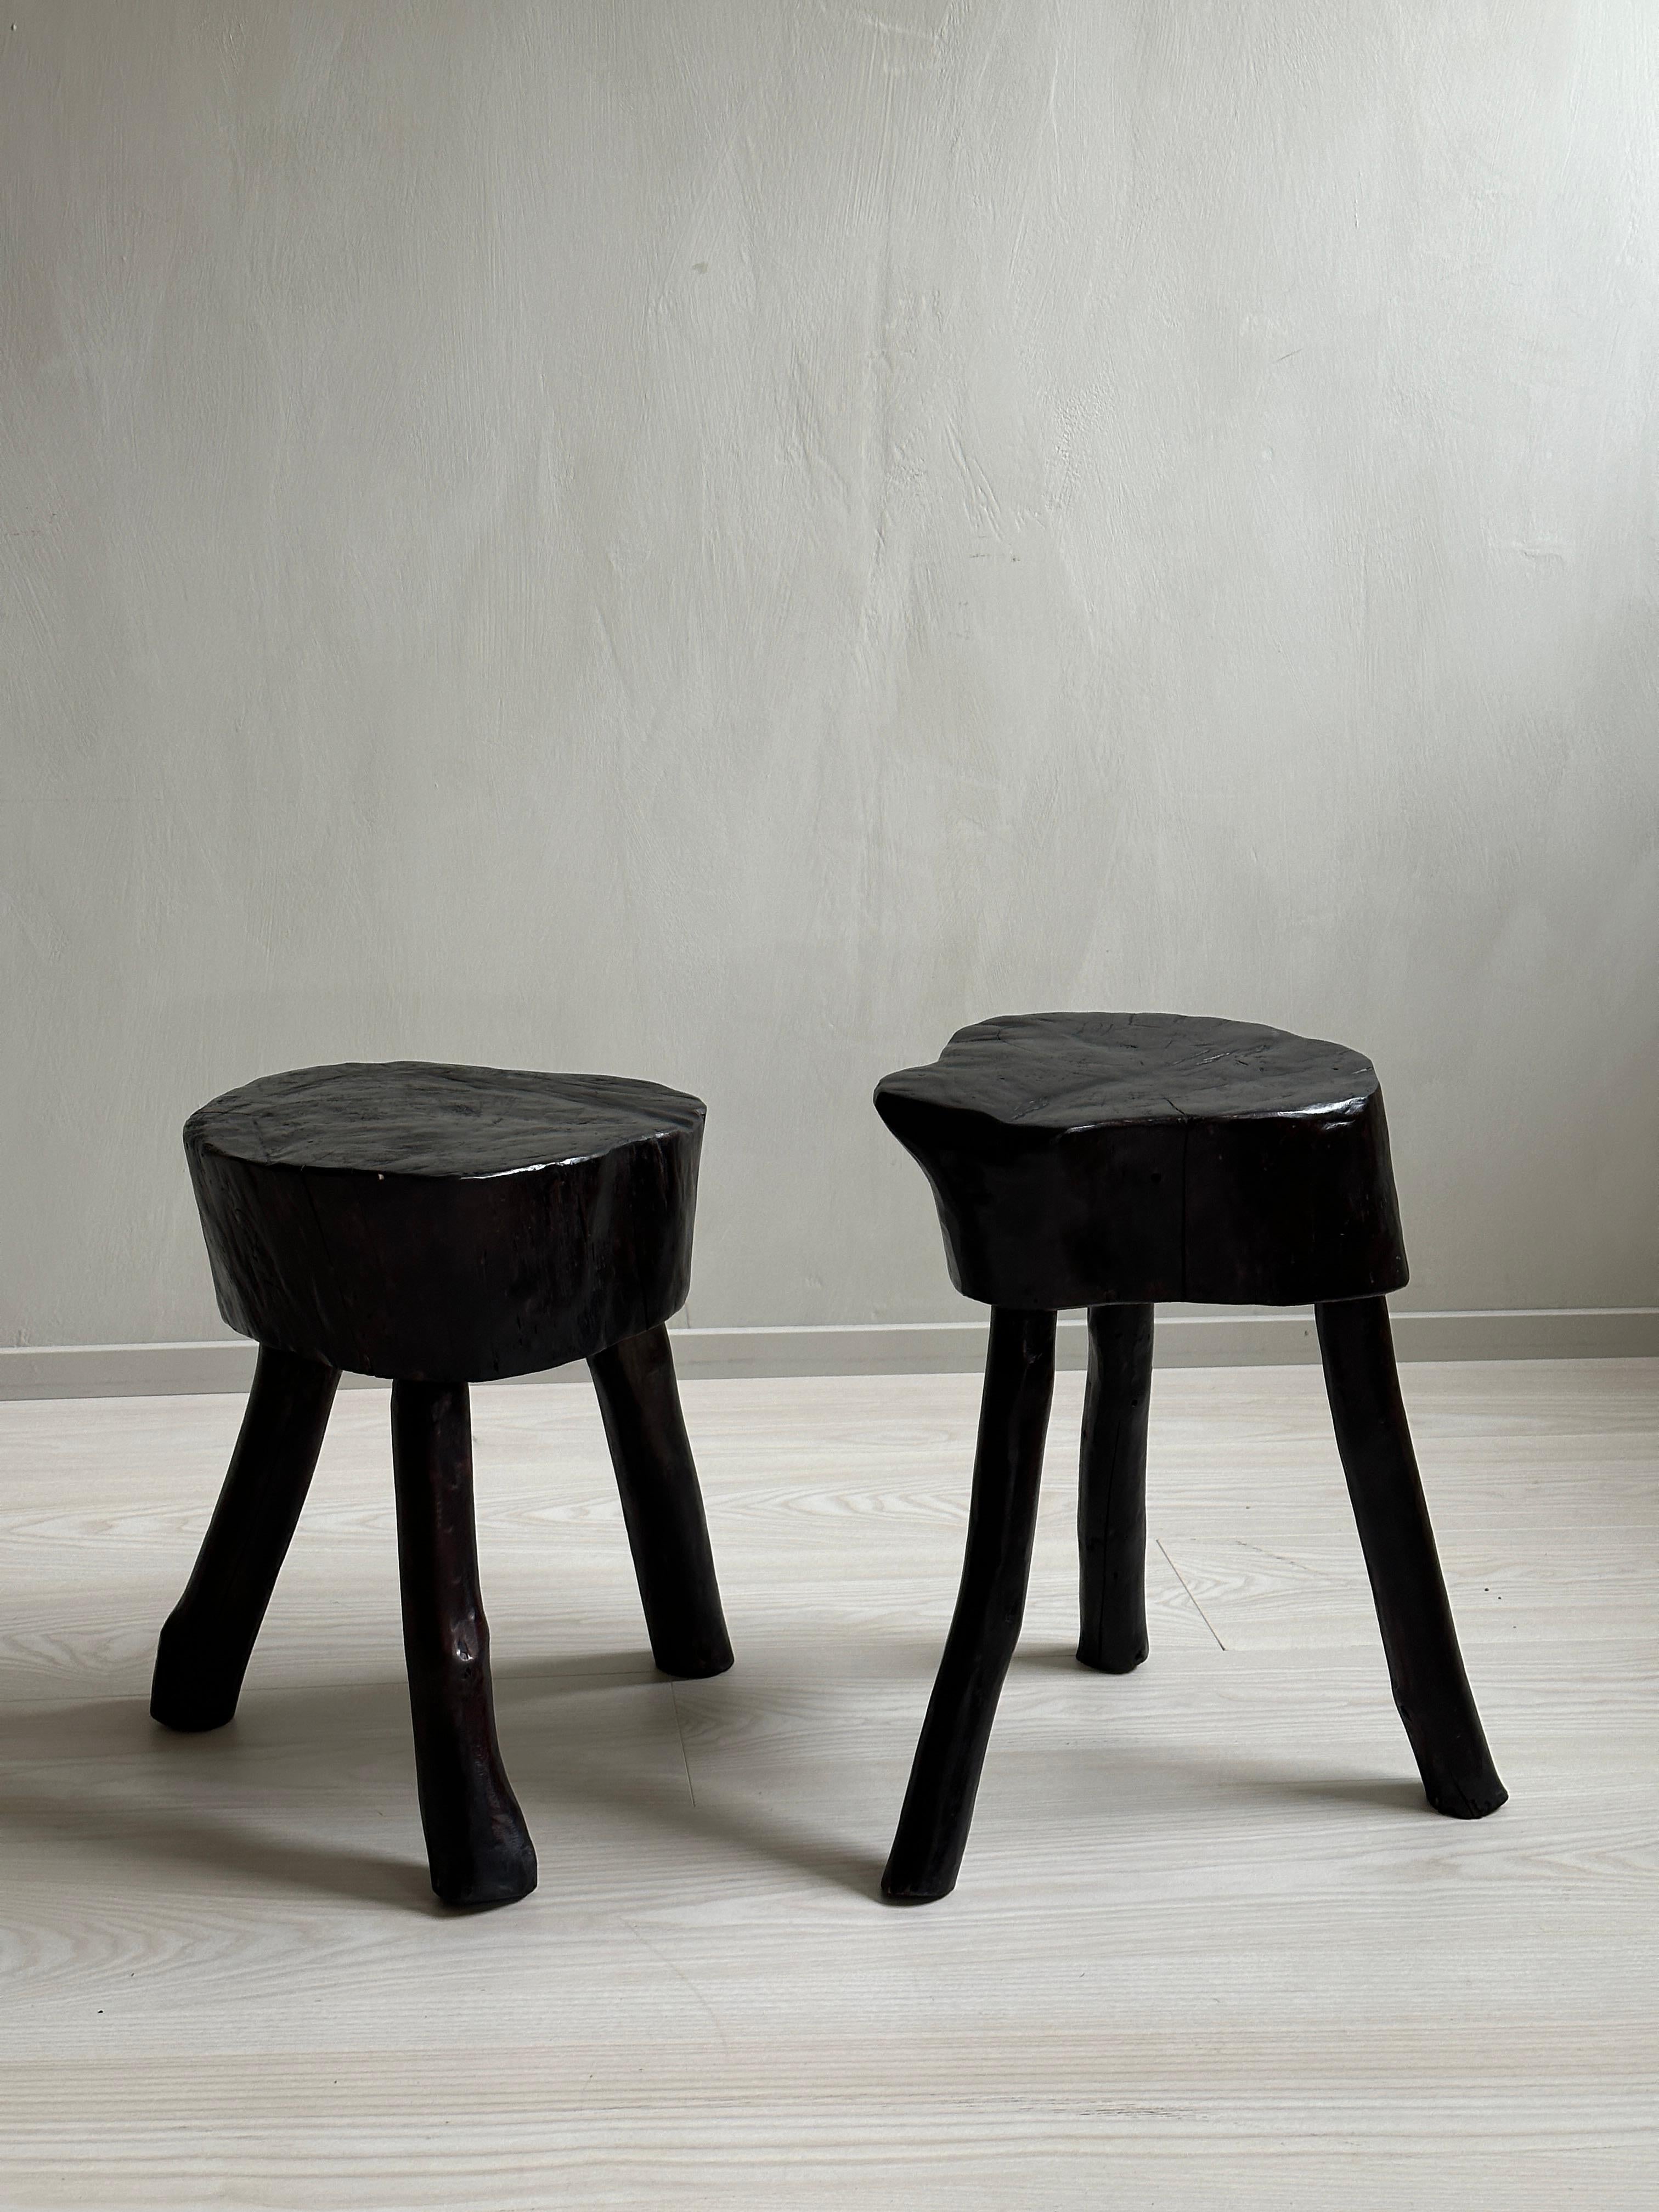 Introducing an exquisite pair of Wabi Sabi Block Stools or Side Tables, originally crafted in Spain in the 1960s and later ebonized for added visual impact. These exceptional pieces are designed in the unique Wabi Sabi style, showcasing a